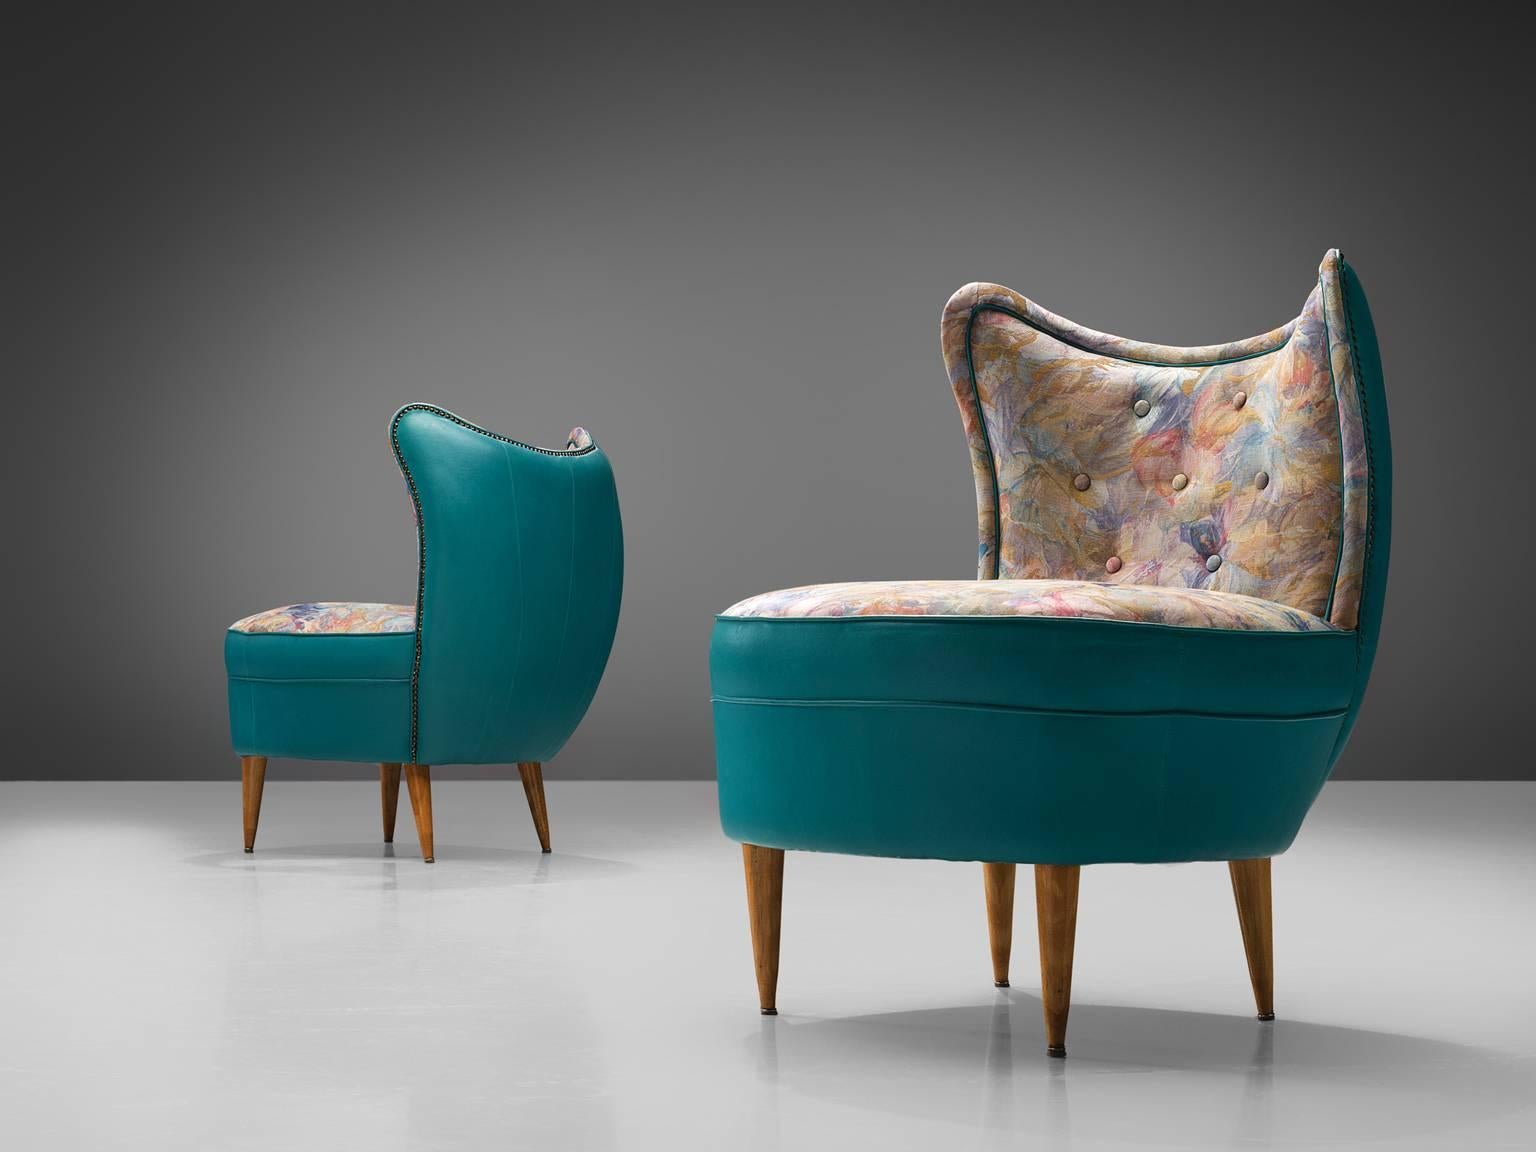 Sofa, turquoise leatherette, fabric, wood, Italy, 1950s.

This set of easy chairs show traits of the design by the Italian designer Veronesi. The quirky set is elegant and frivolous and is completely rounded when seen from behind. The pieces feature